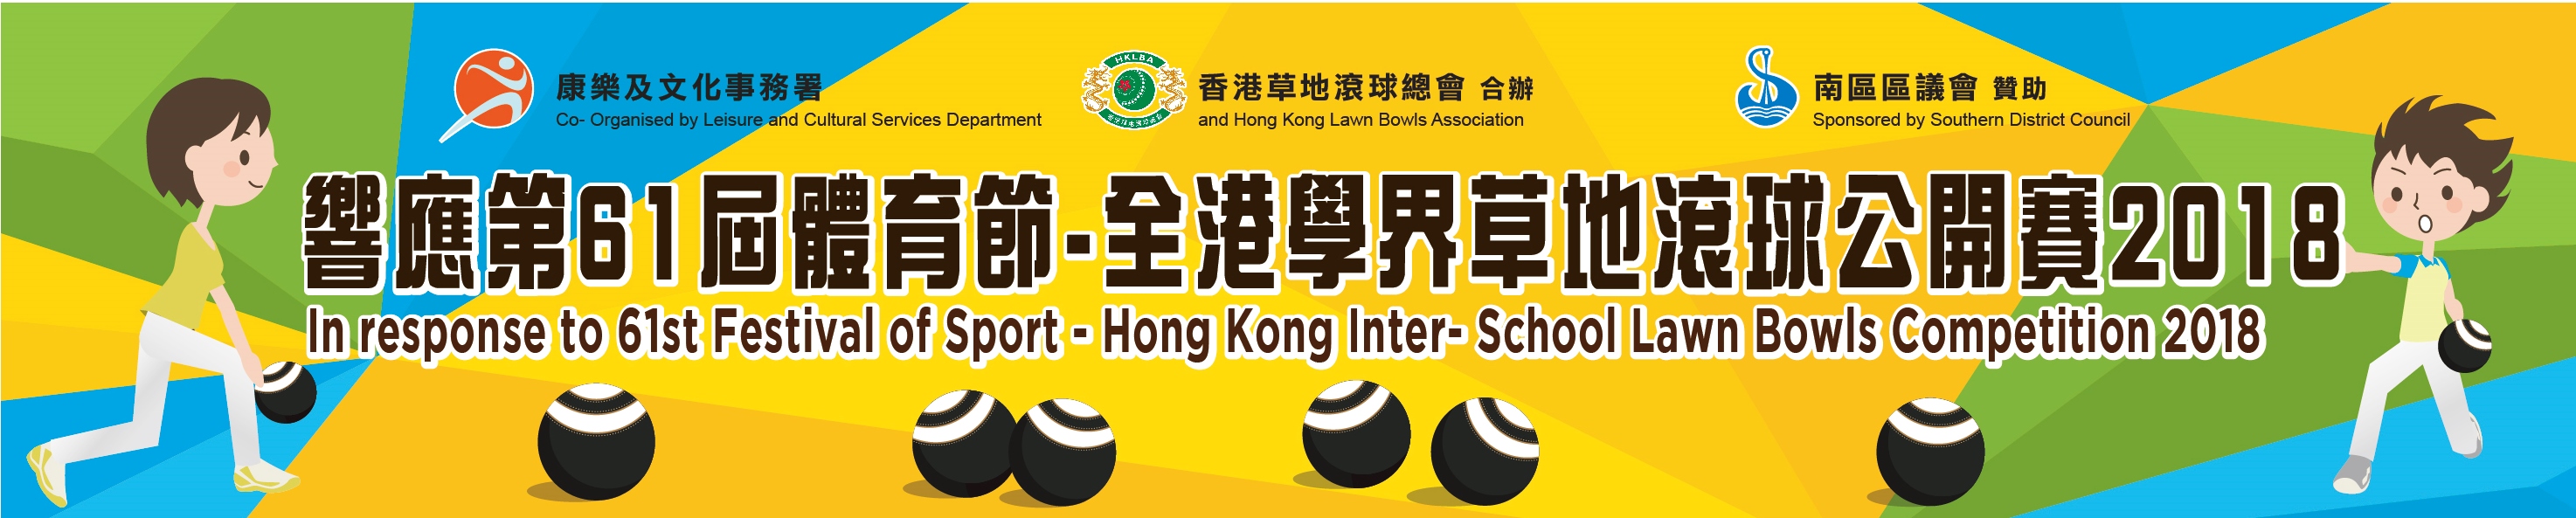 Hong Kong Inter-schools Lawn Bowls Competition 2018 (Updated on 10/5/18)